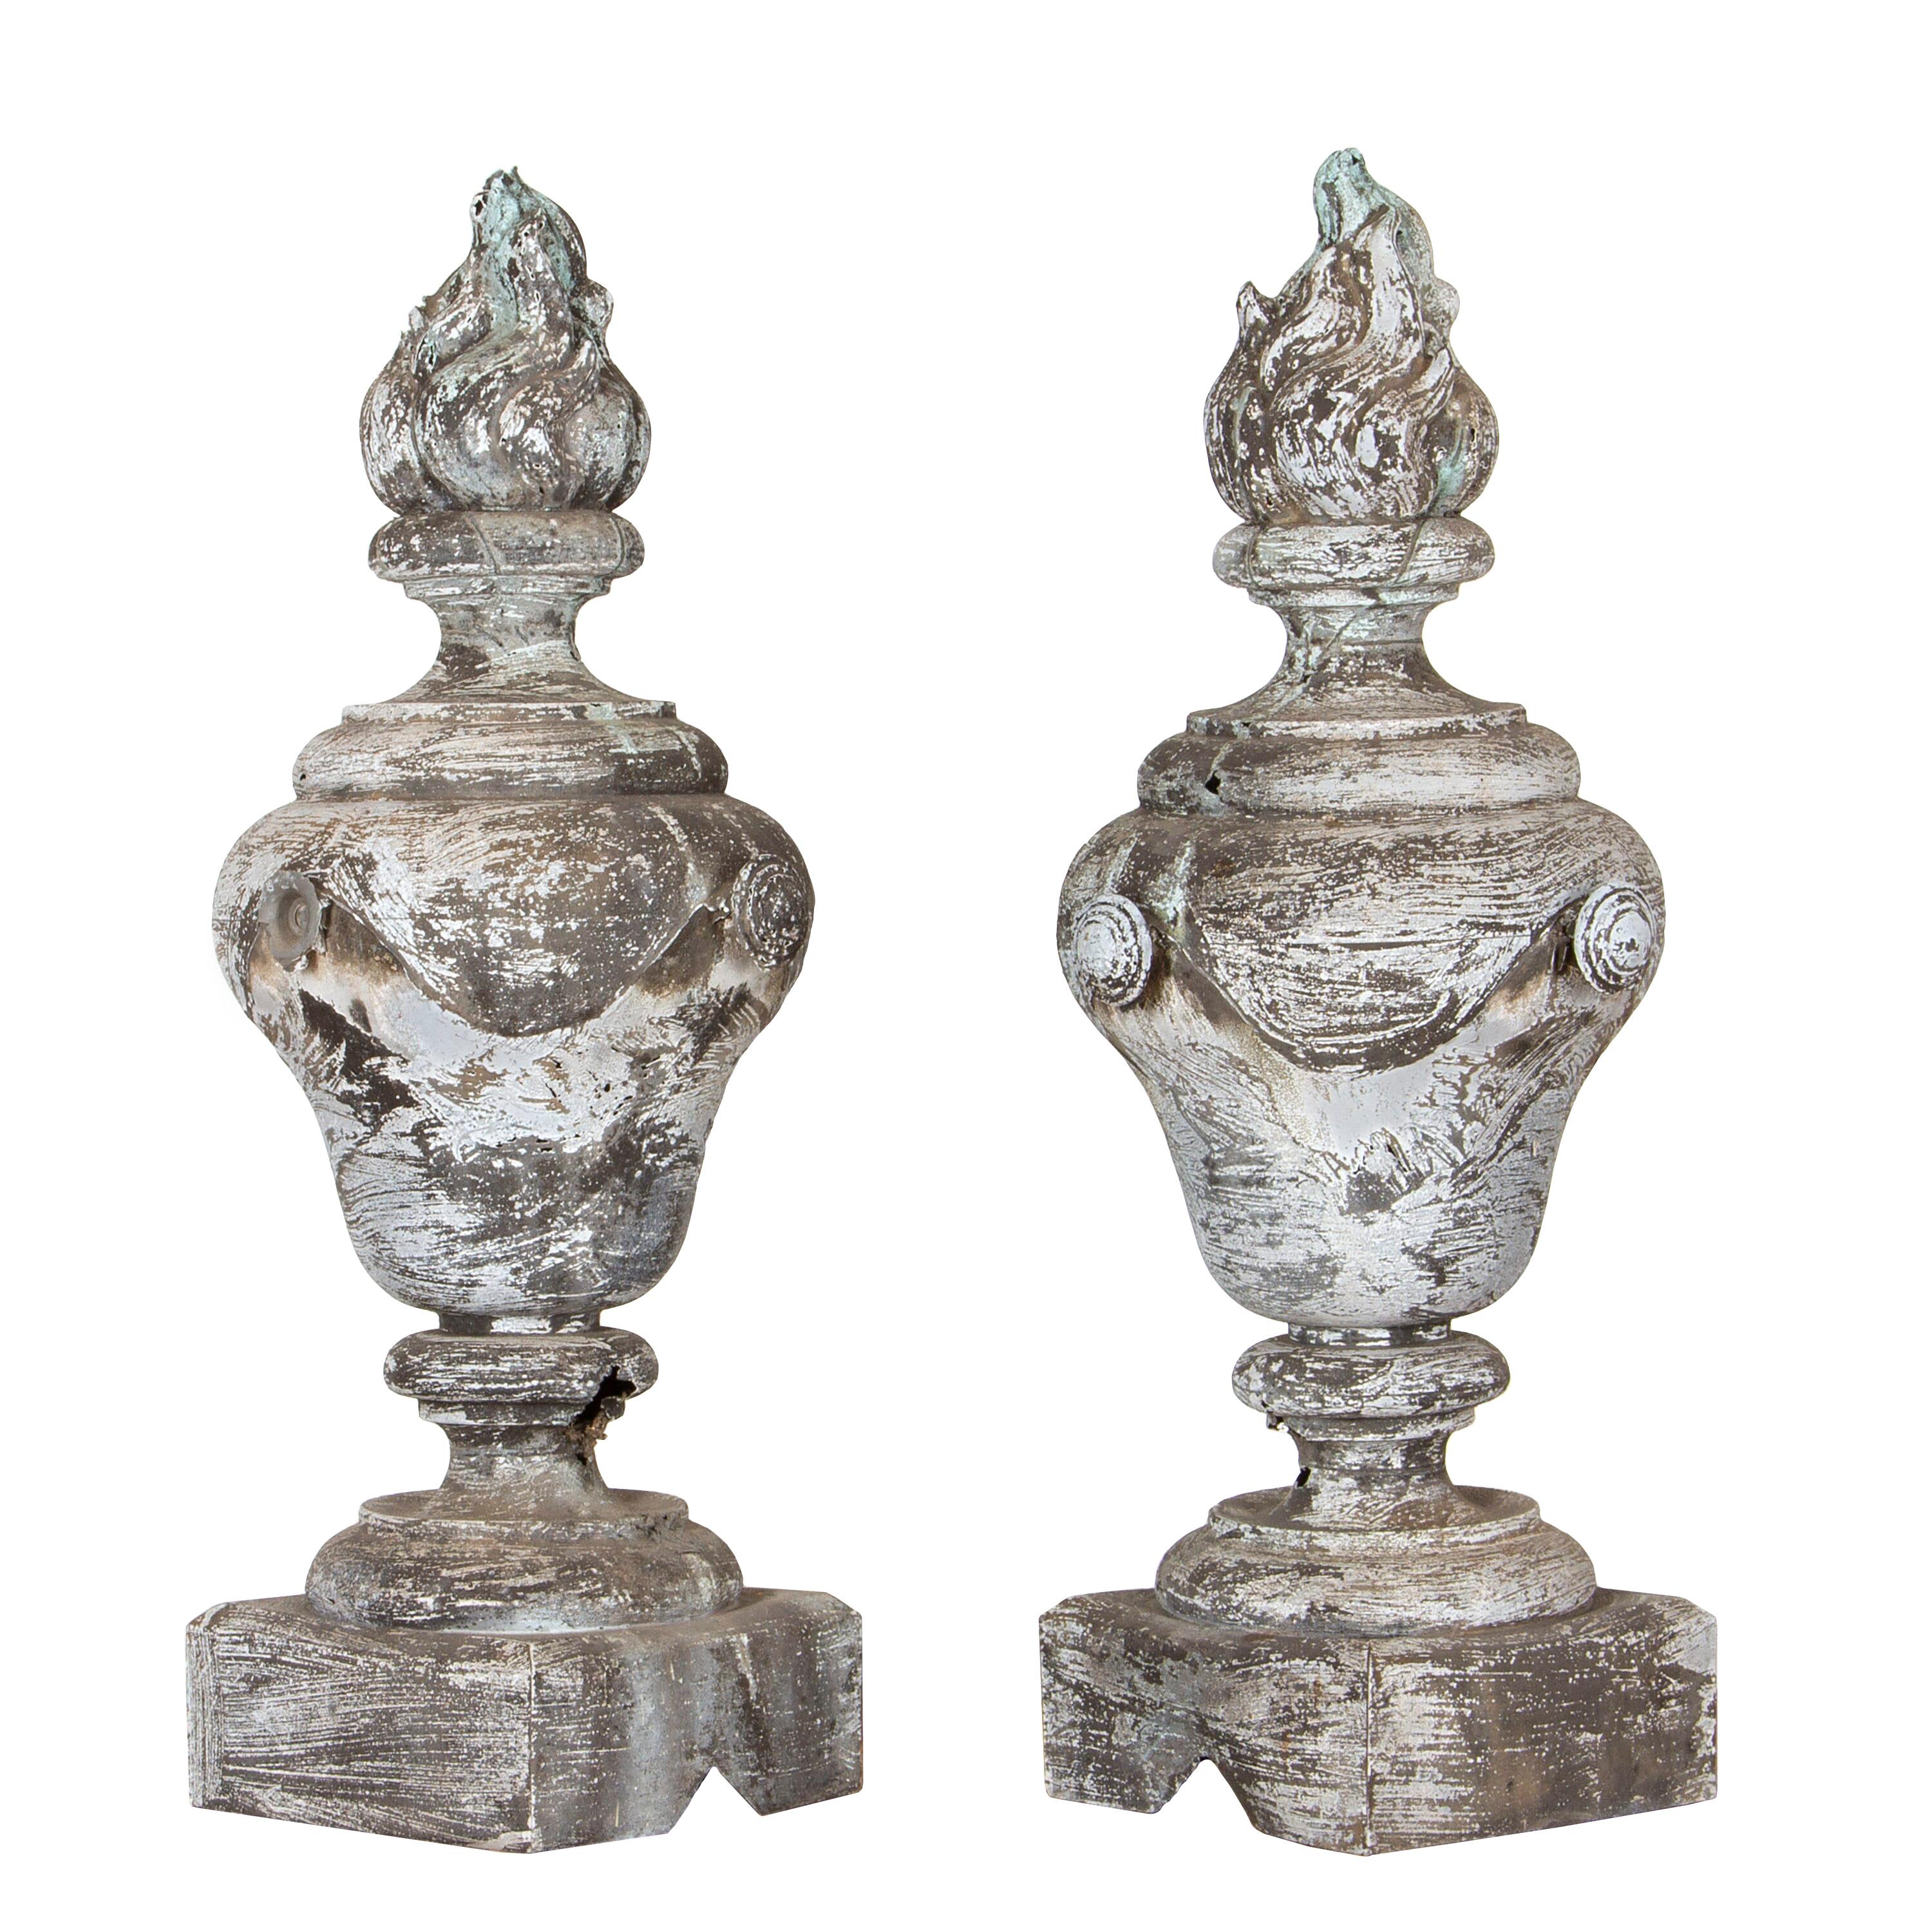 Lovely pair of 19th Century zinc finials. 
This decorative pair of finials feature detailed flame tops with a lovely swag decoration to the circumference. Terminating on a square zinc base. 
A decorative pair that will make for a great feature